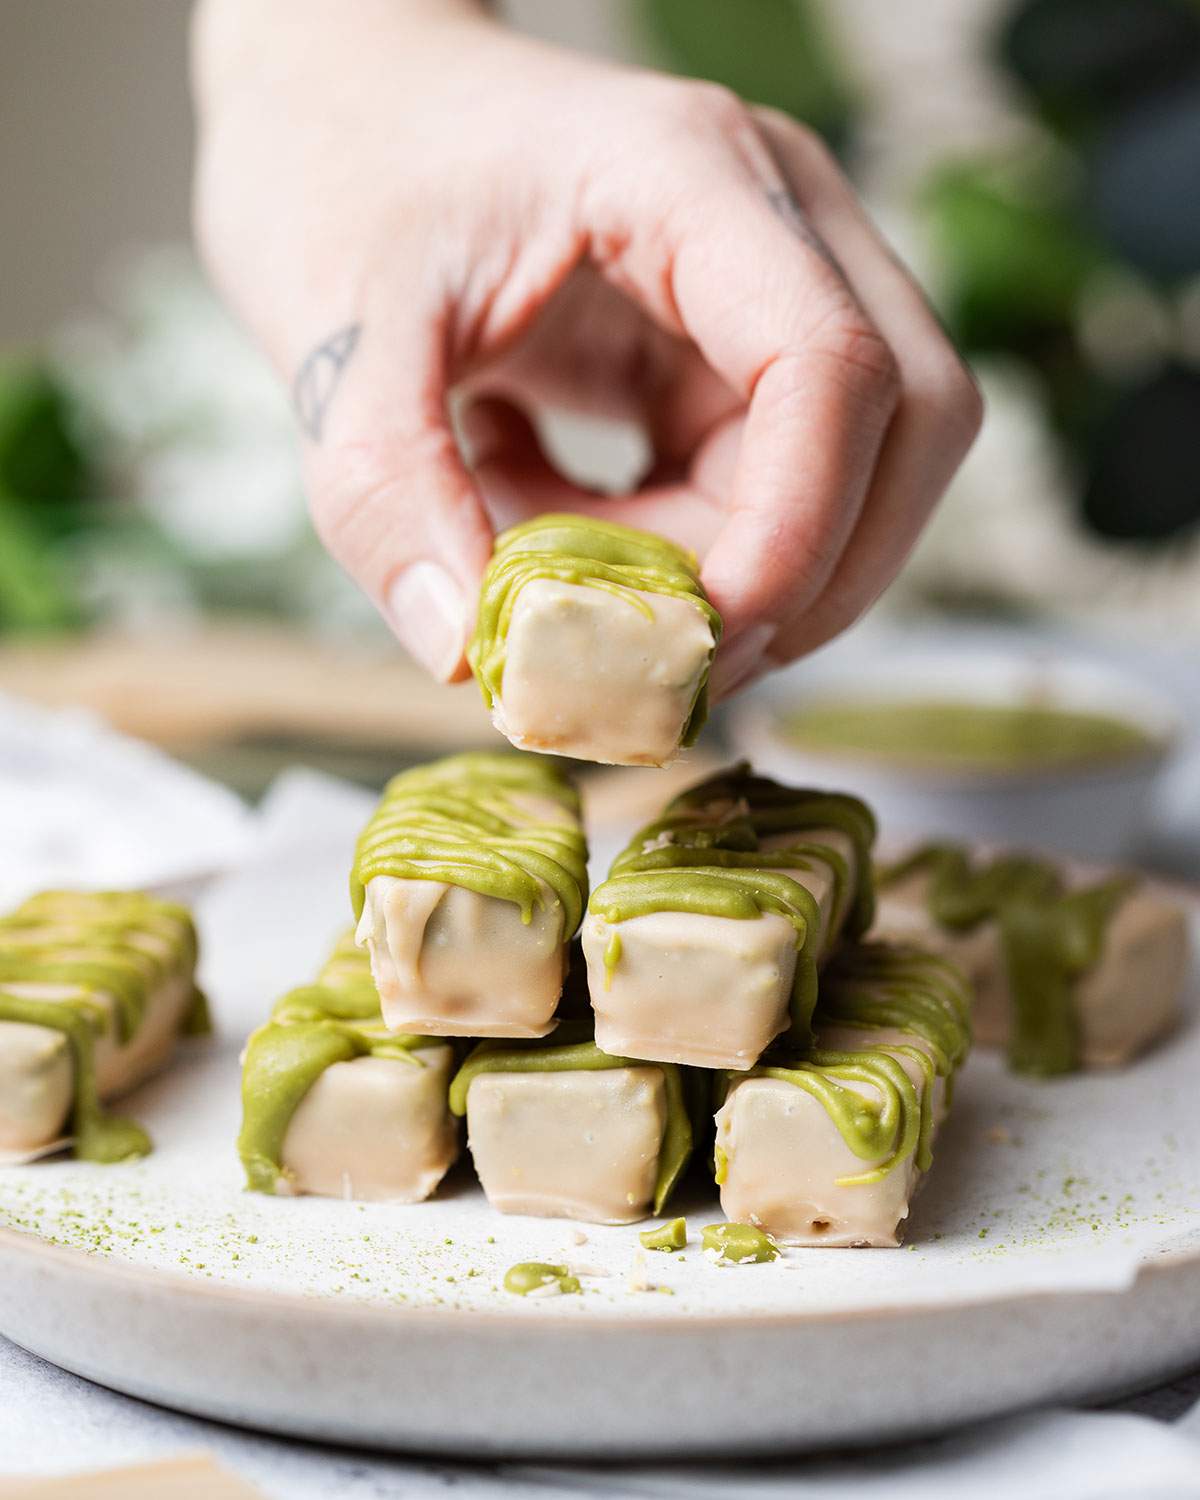 A hand is picking up a homemade matcha twix bars from a stack.